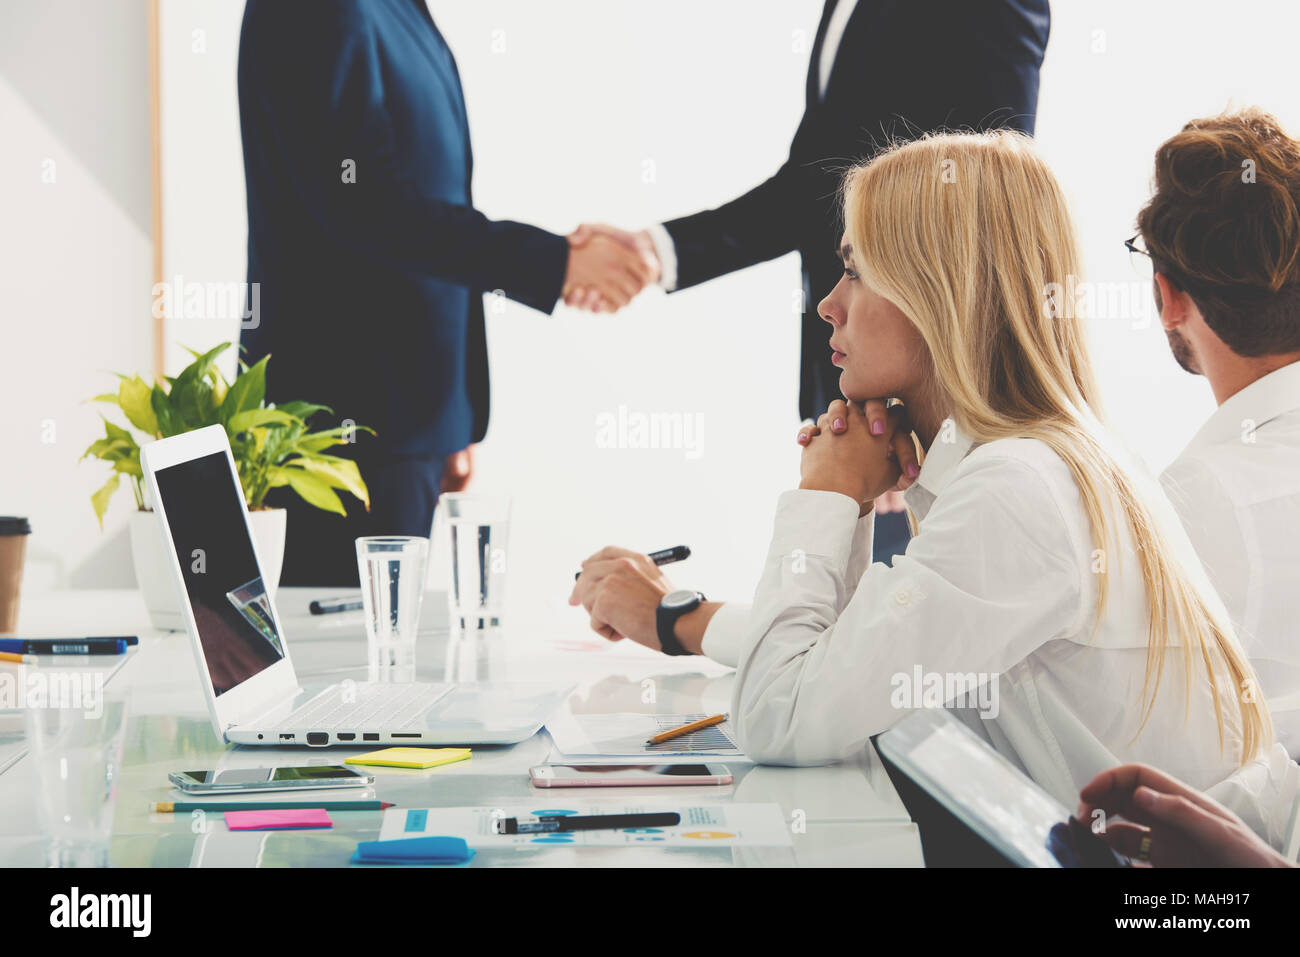 Business people at the office work together. concept of teamwork and partnership Stock Photo